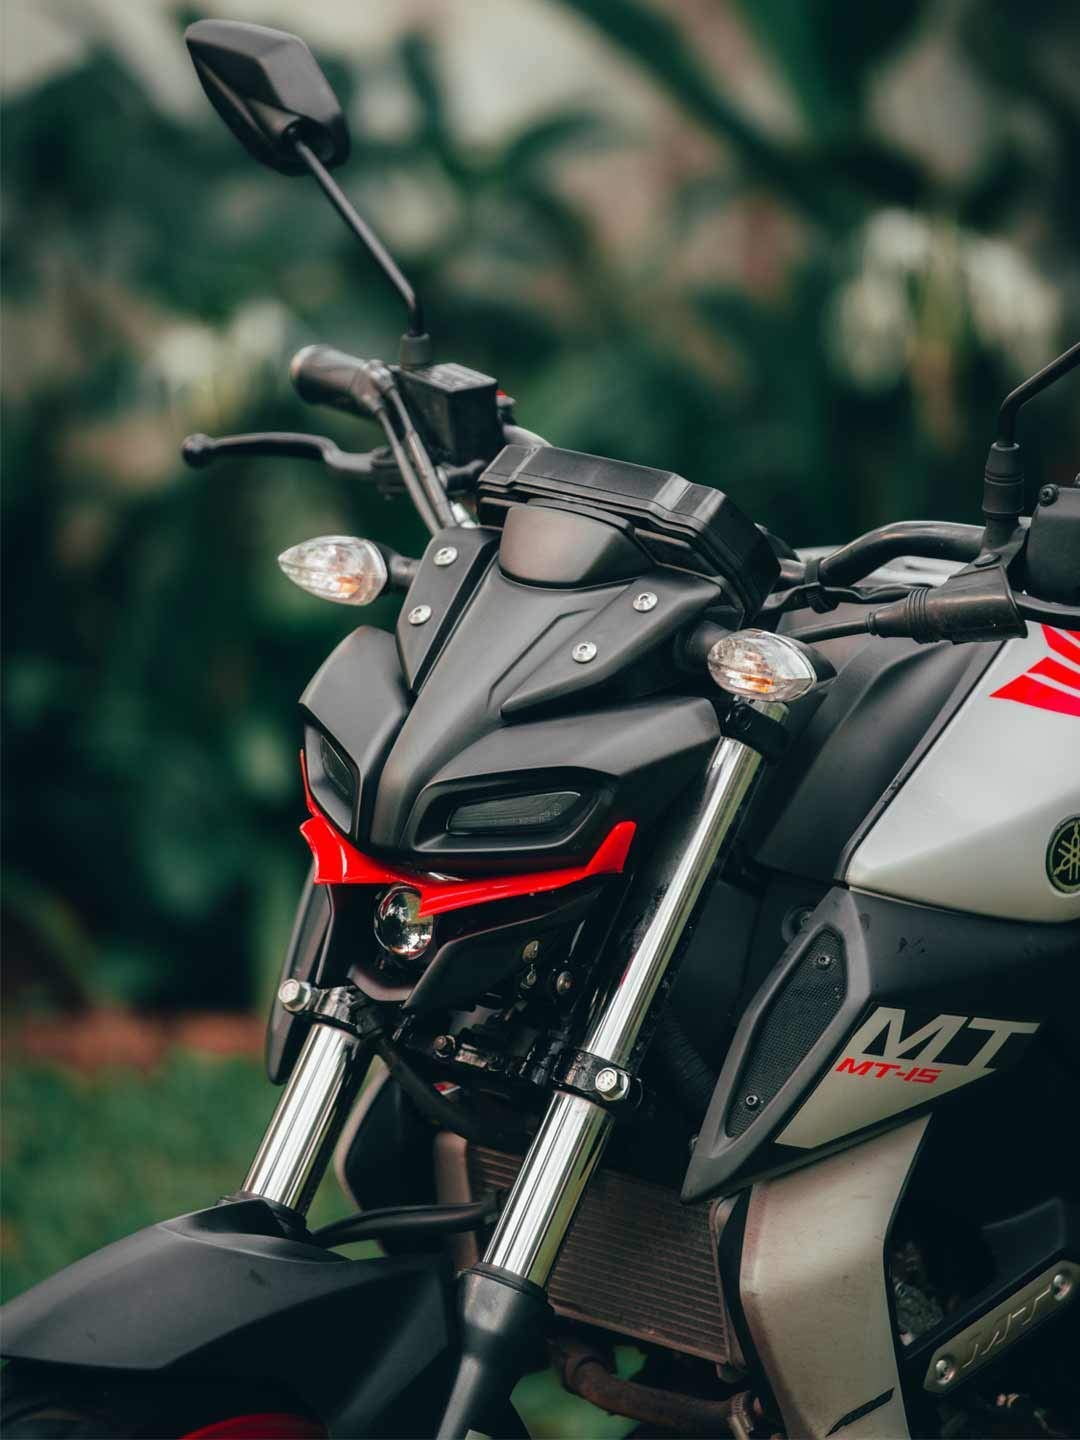 Yamaha MT15 Winglet (Red) - Premium Winglet from Sparewick - Just Rs. 250! Shop now at Sparewick